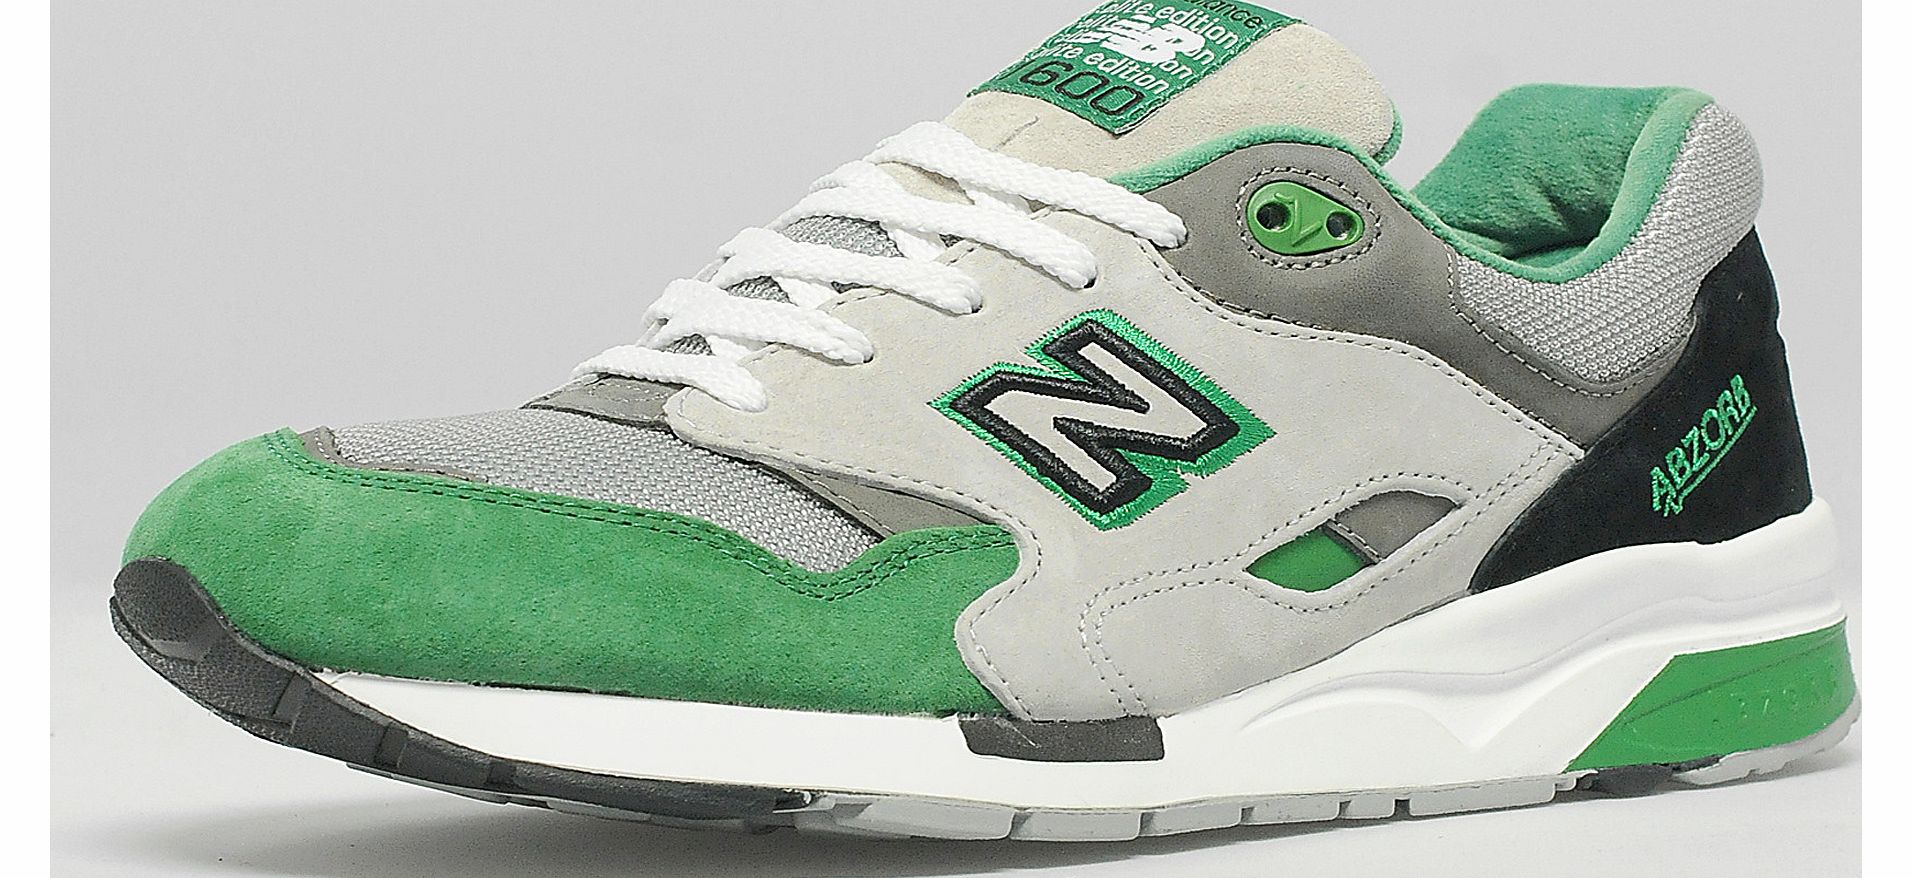 New Balance 1600 - size? exclusive